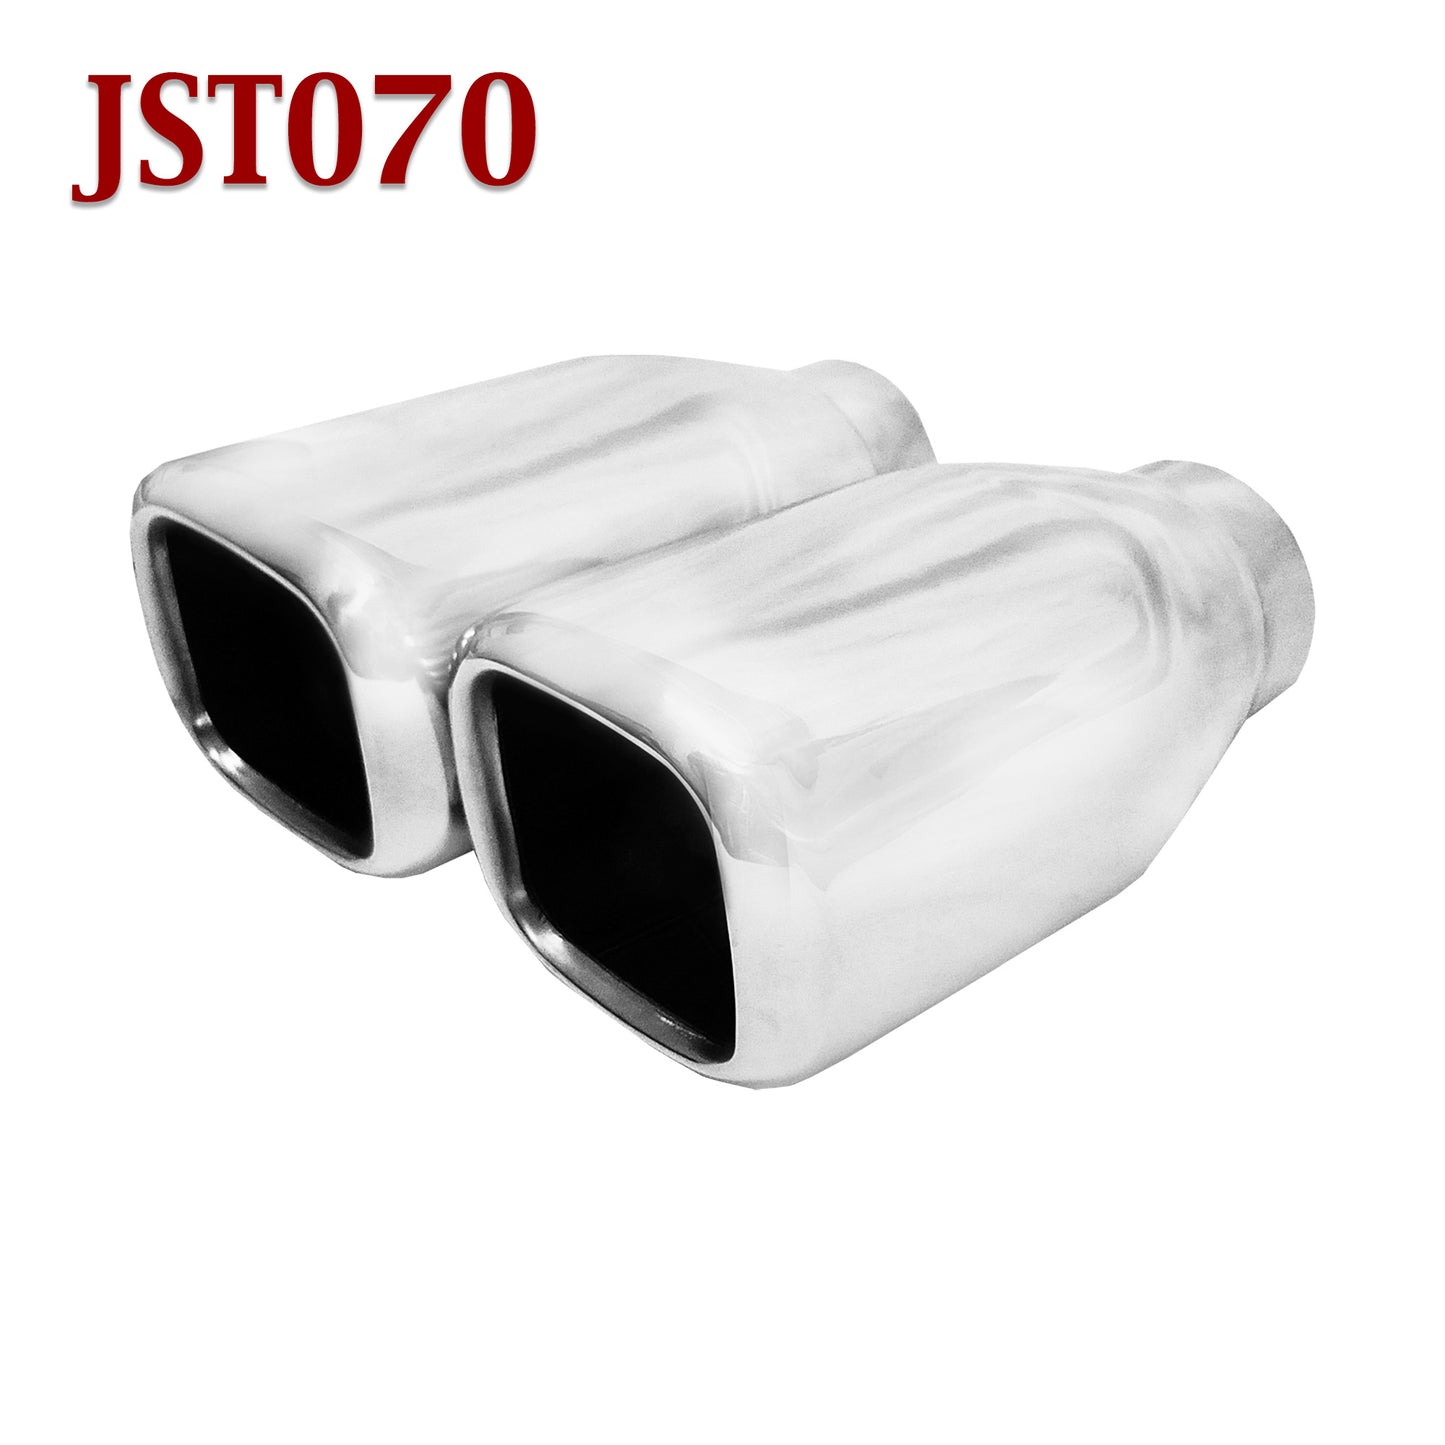 JST070 2.25" Stainless Square Exhaust Tip 2 1/4" Inlet / 4" Outlet / 7" Long